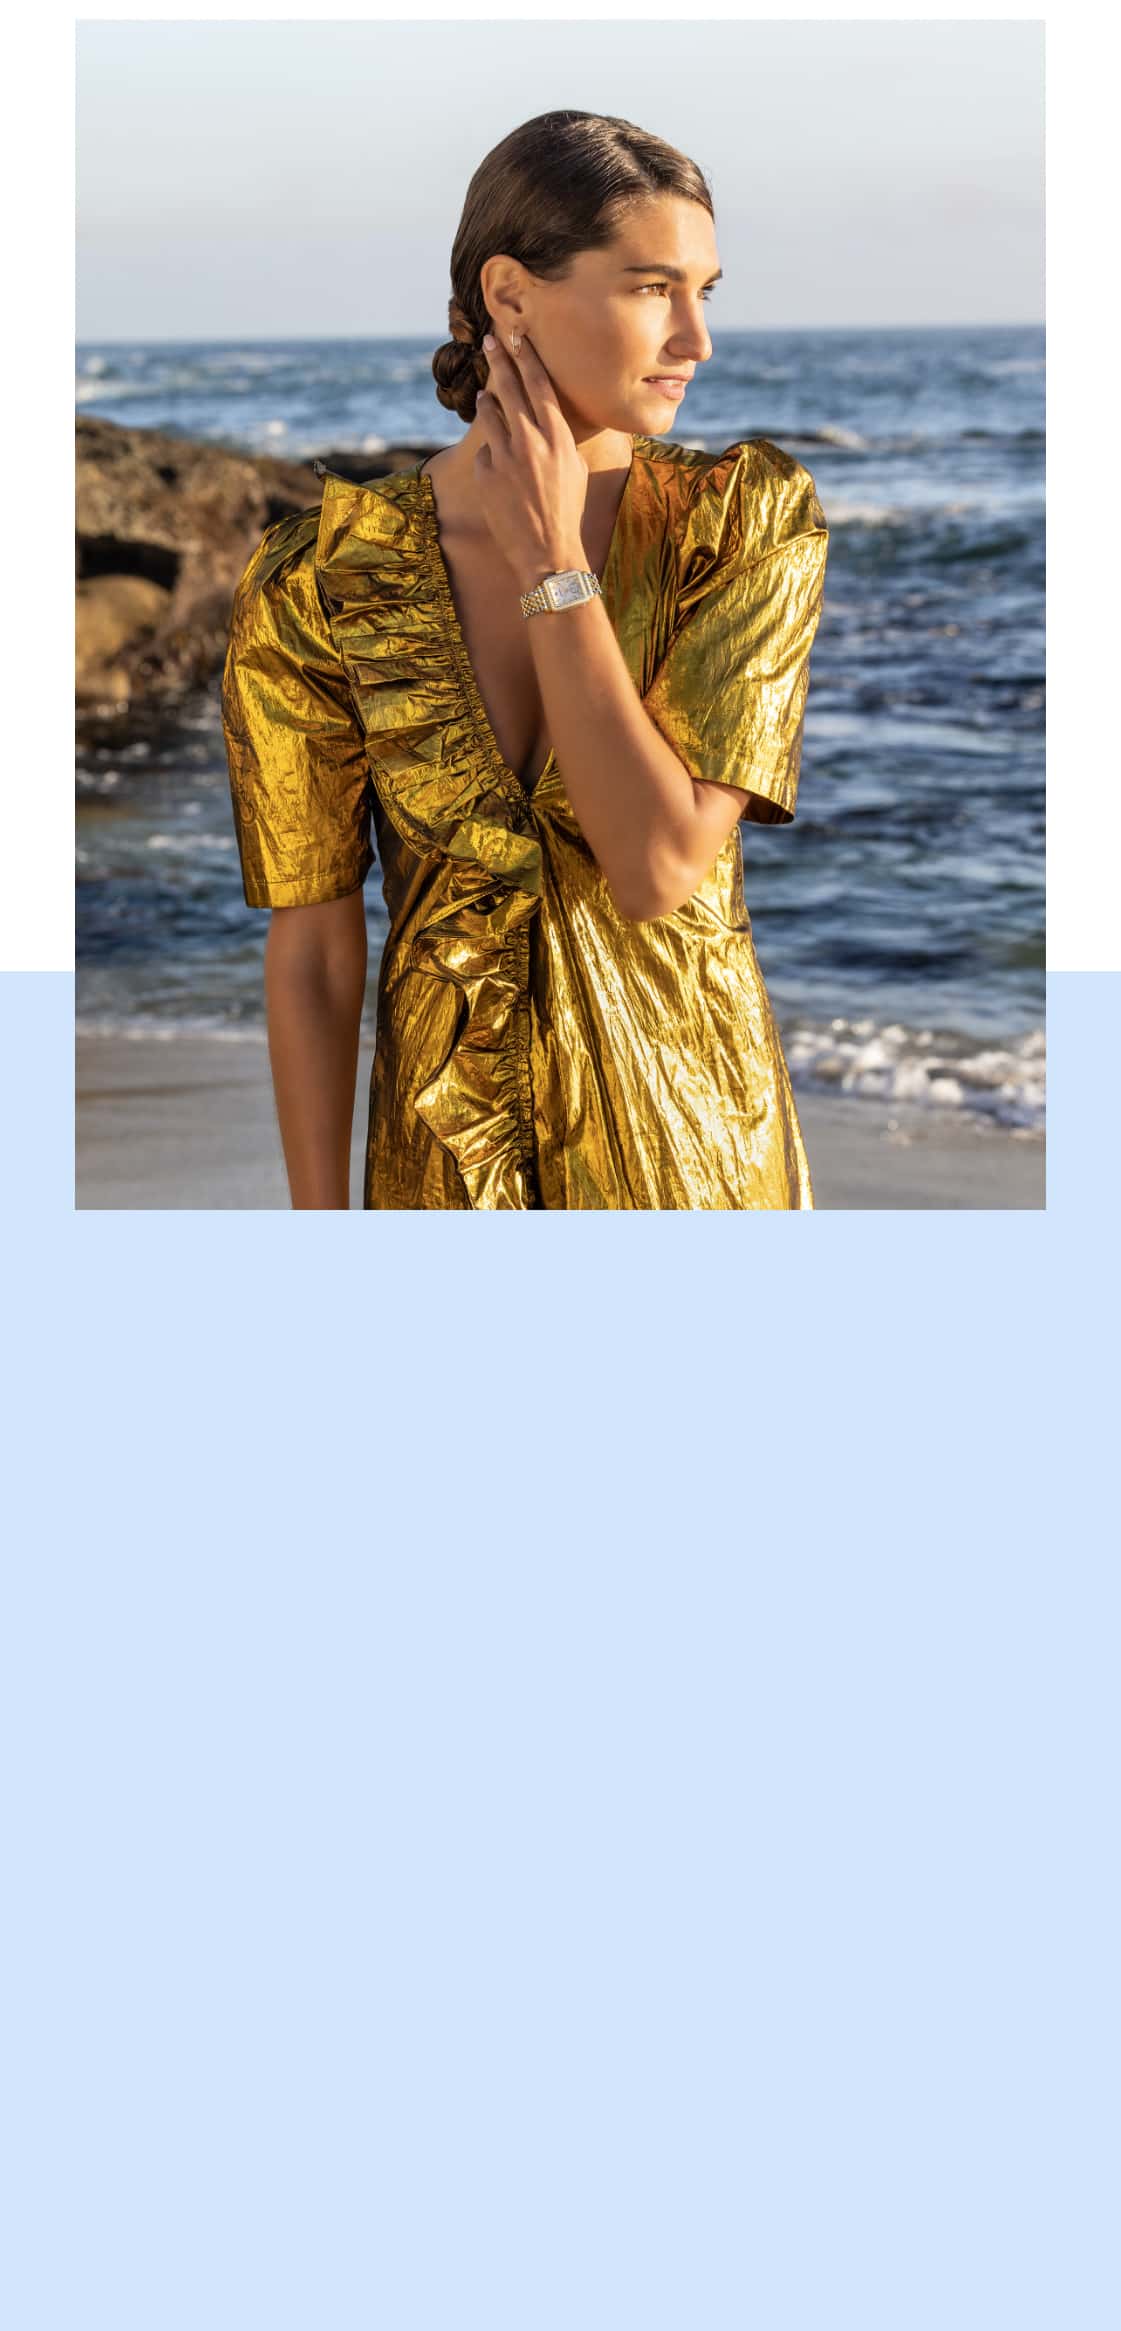 Images of a woman wearing a gold dress on the beach wearing the MICHELE Deco Mid watch